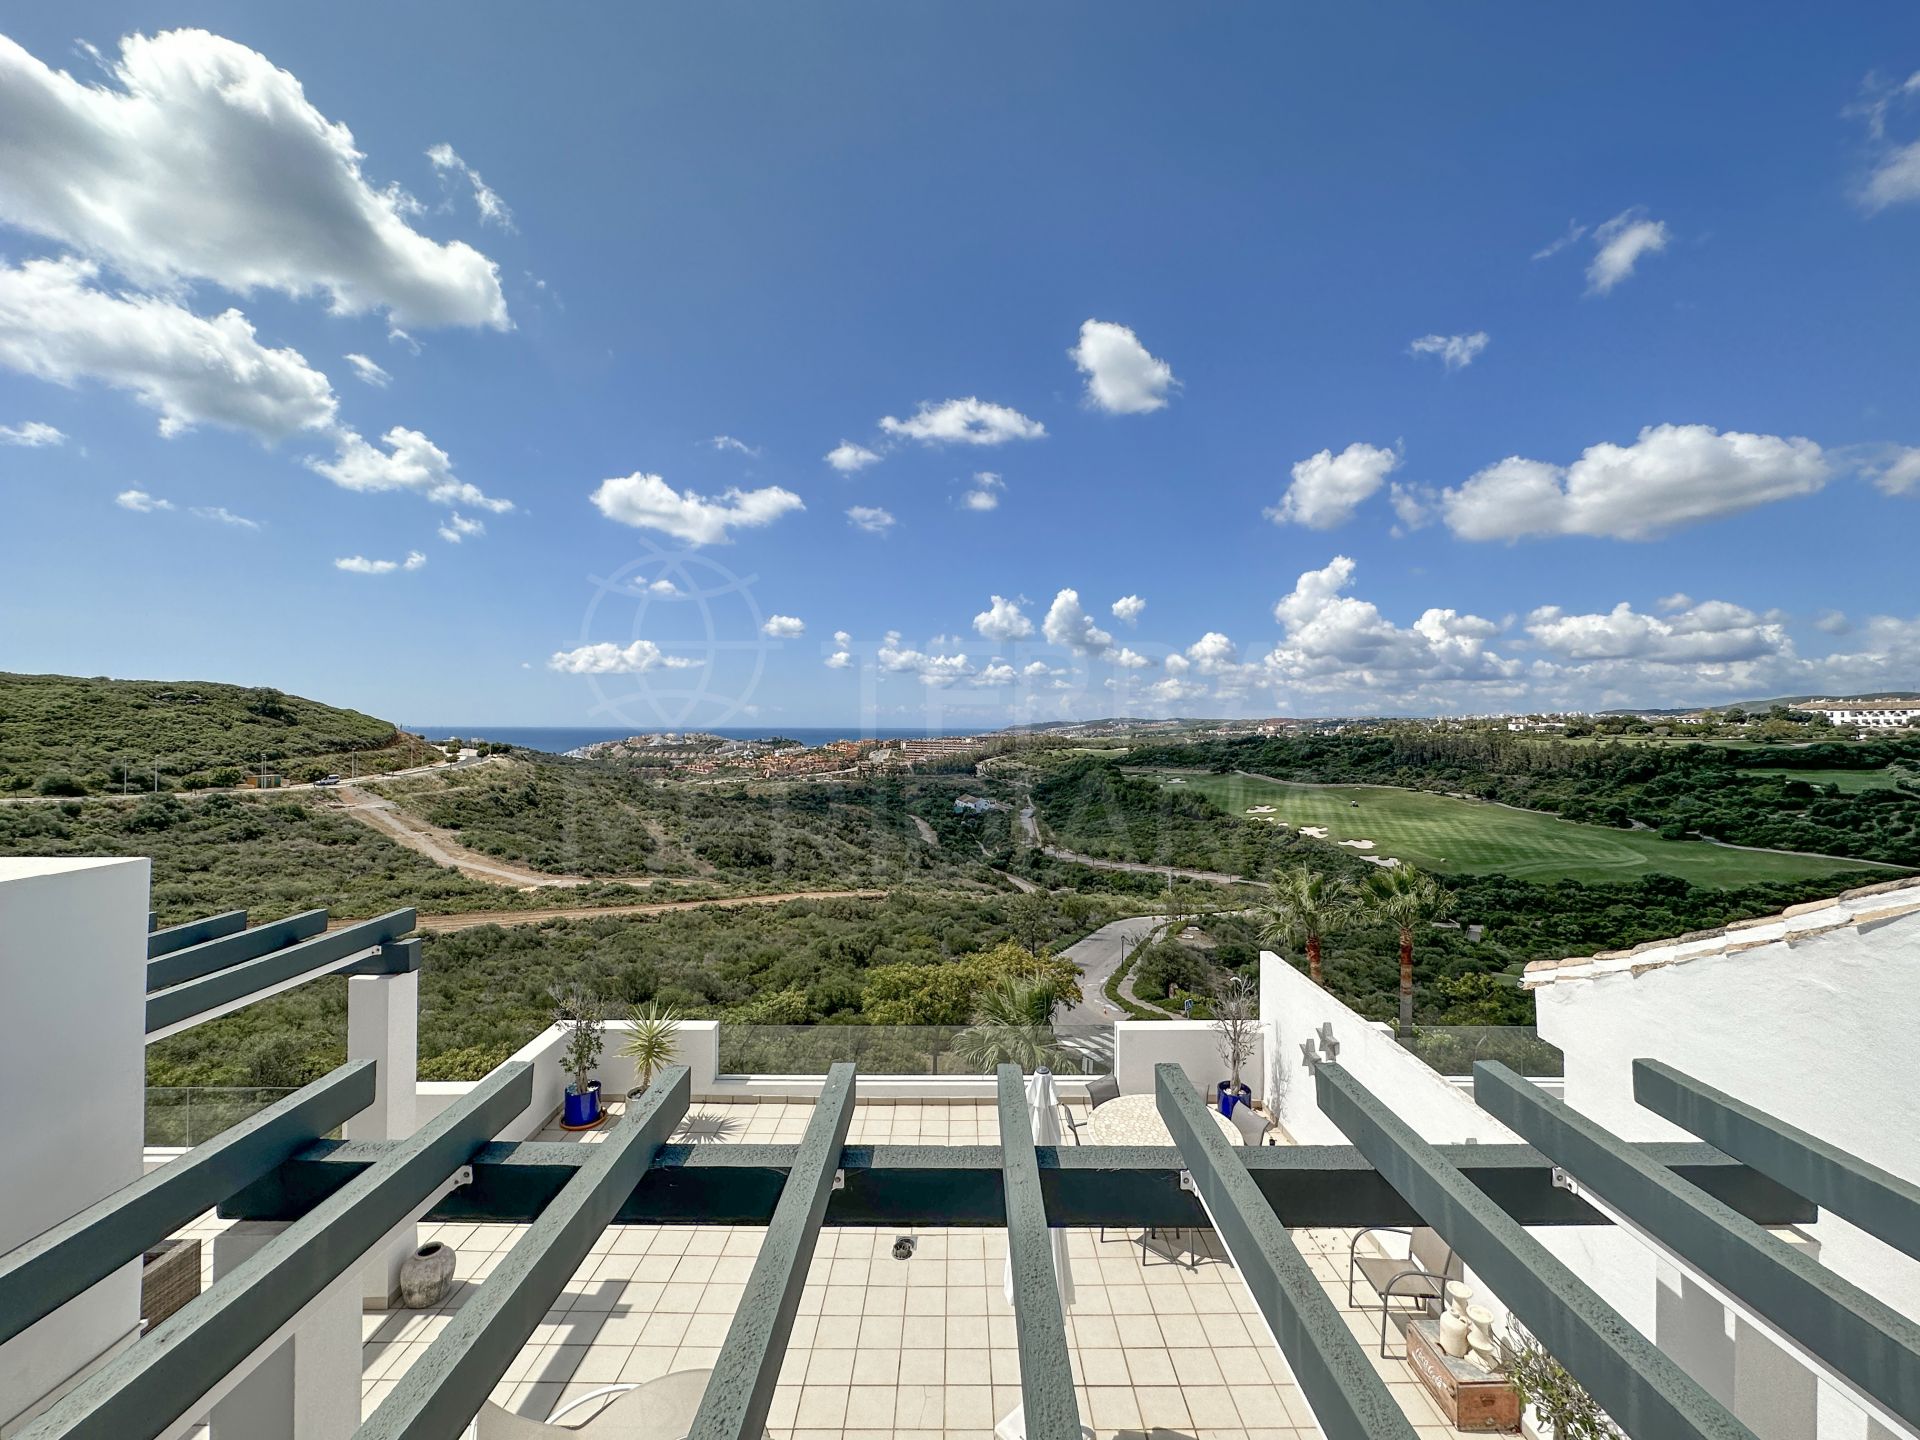 Exquisite 3Bed duplex penthouse with spectacular views for sale in Finca Cortesin Golf Resort